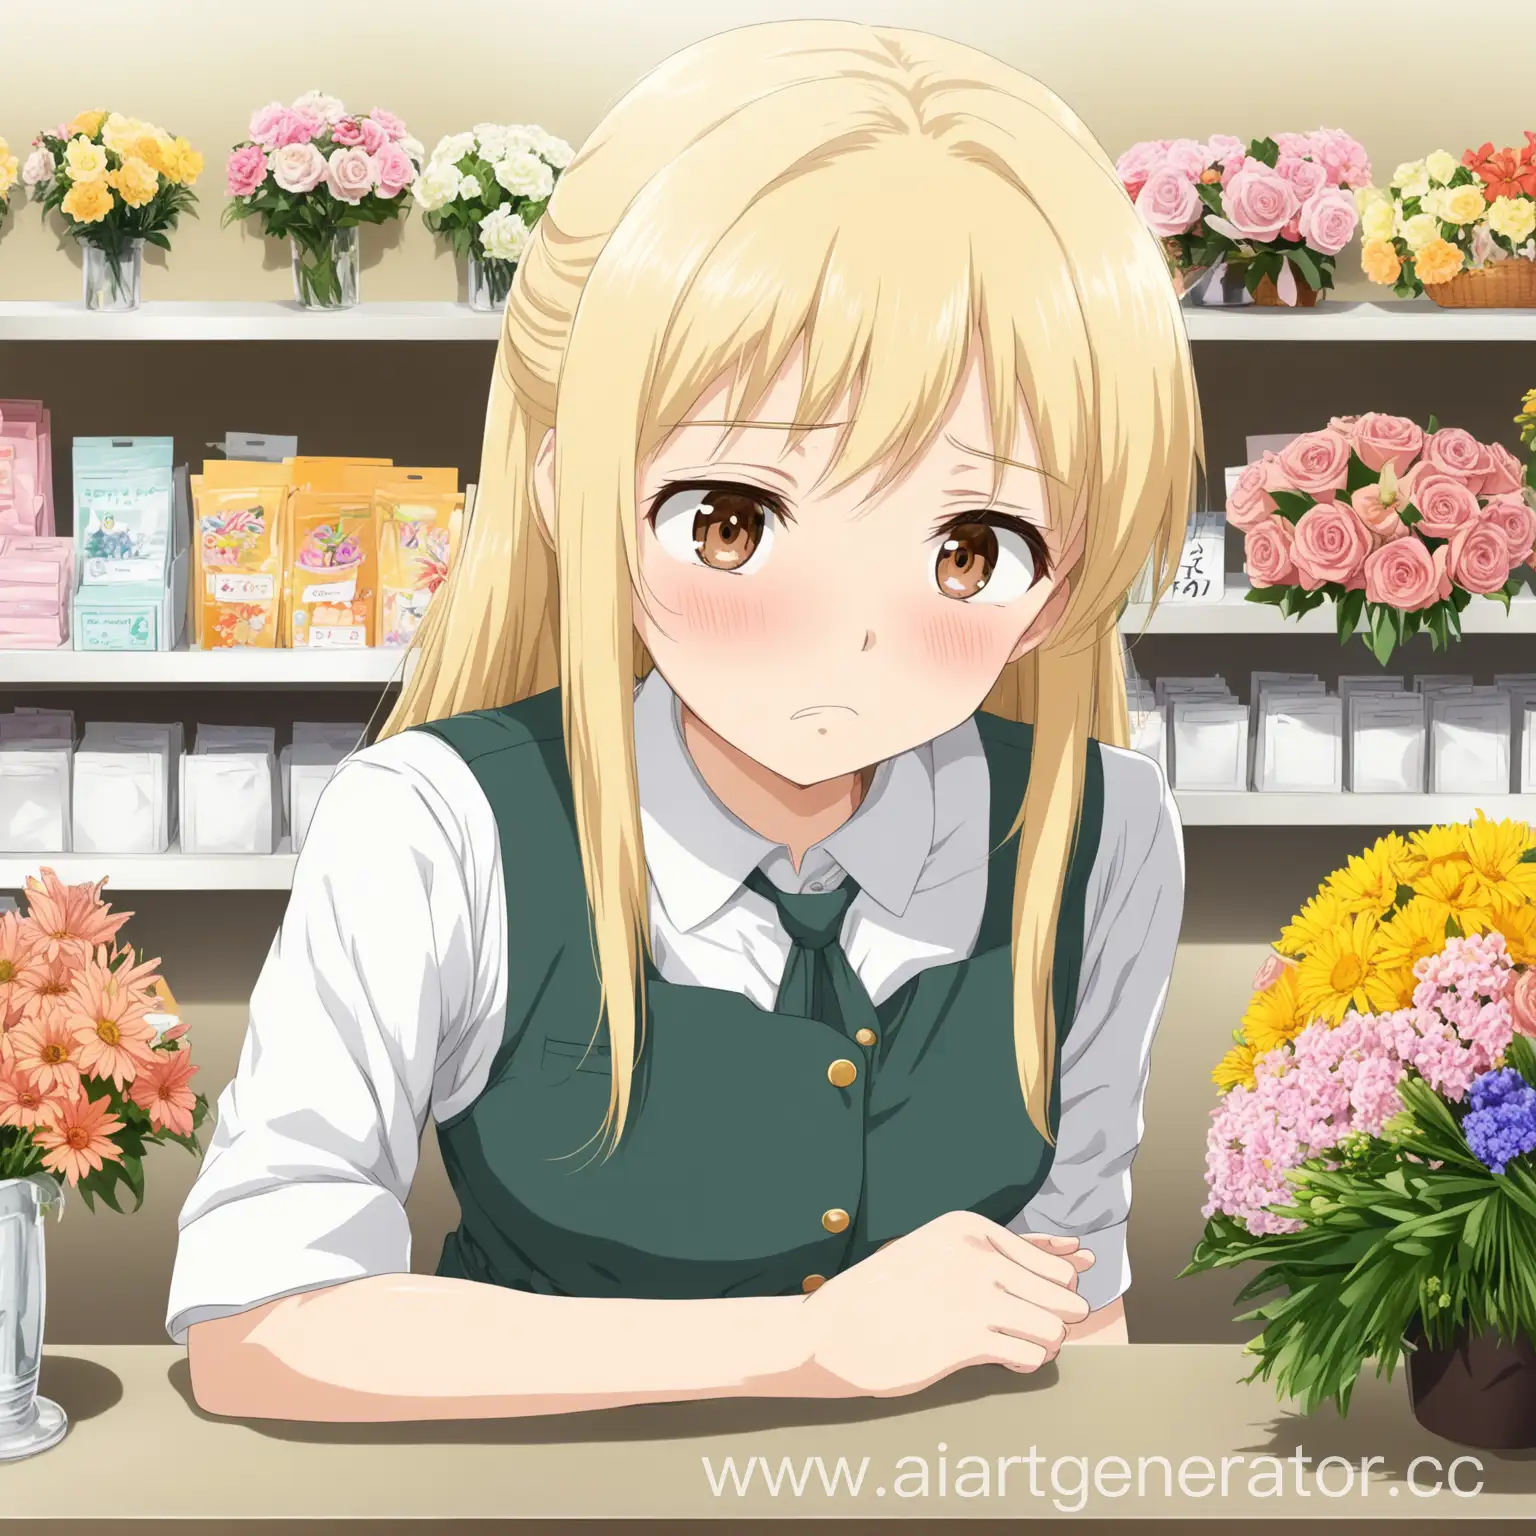 girl, anime, blonde hair, flowers, flower seller, brown eyes, saleswoman's uniform, young, one girl, behind the counter, delicate colors, embarrassment, long blonde hair